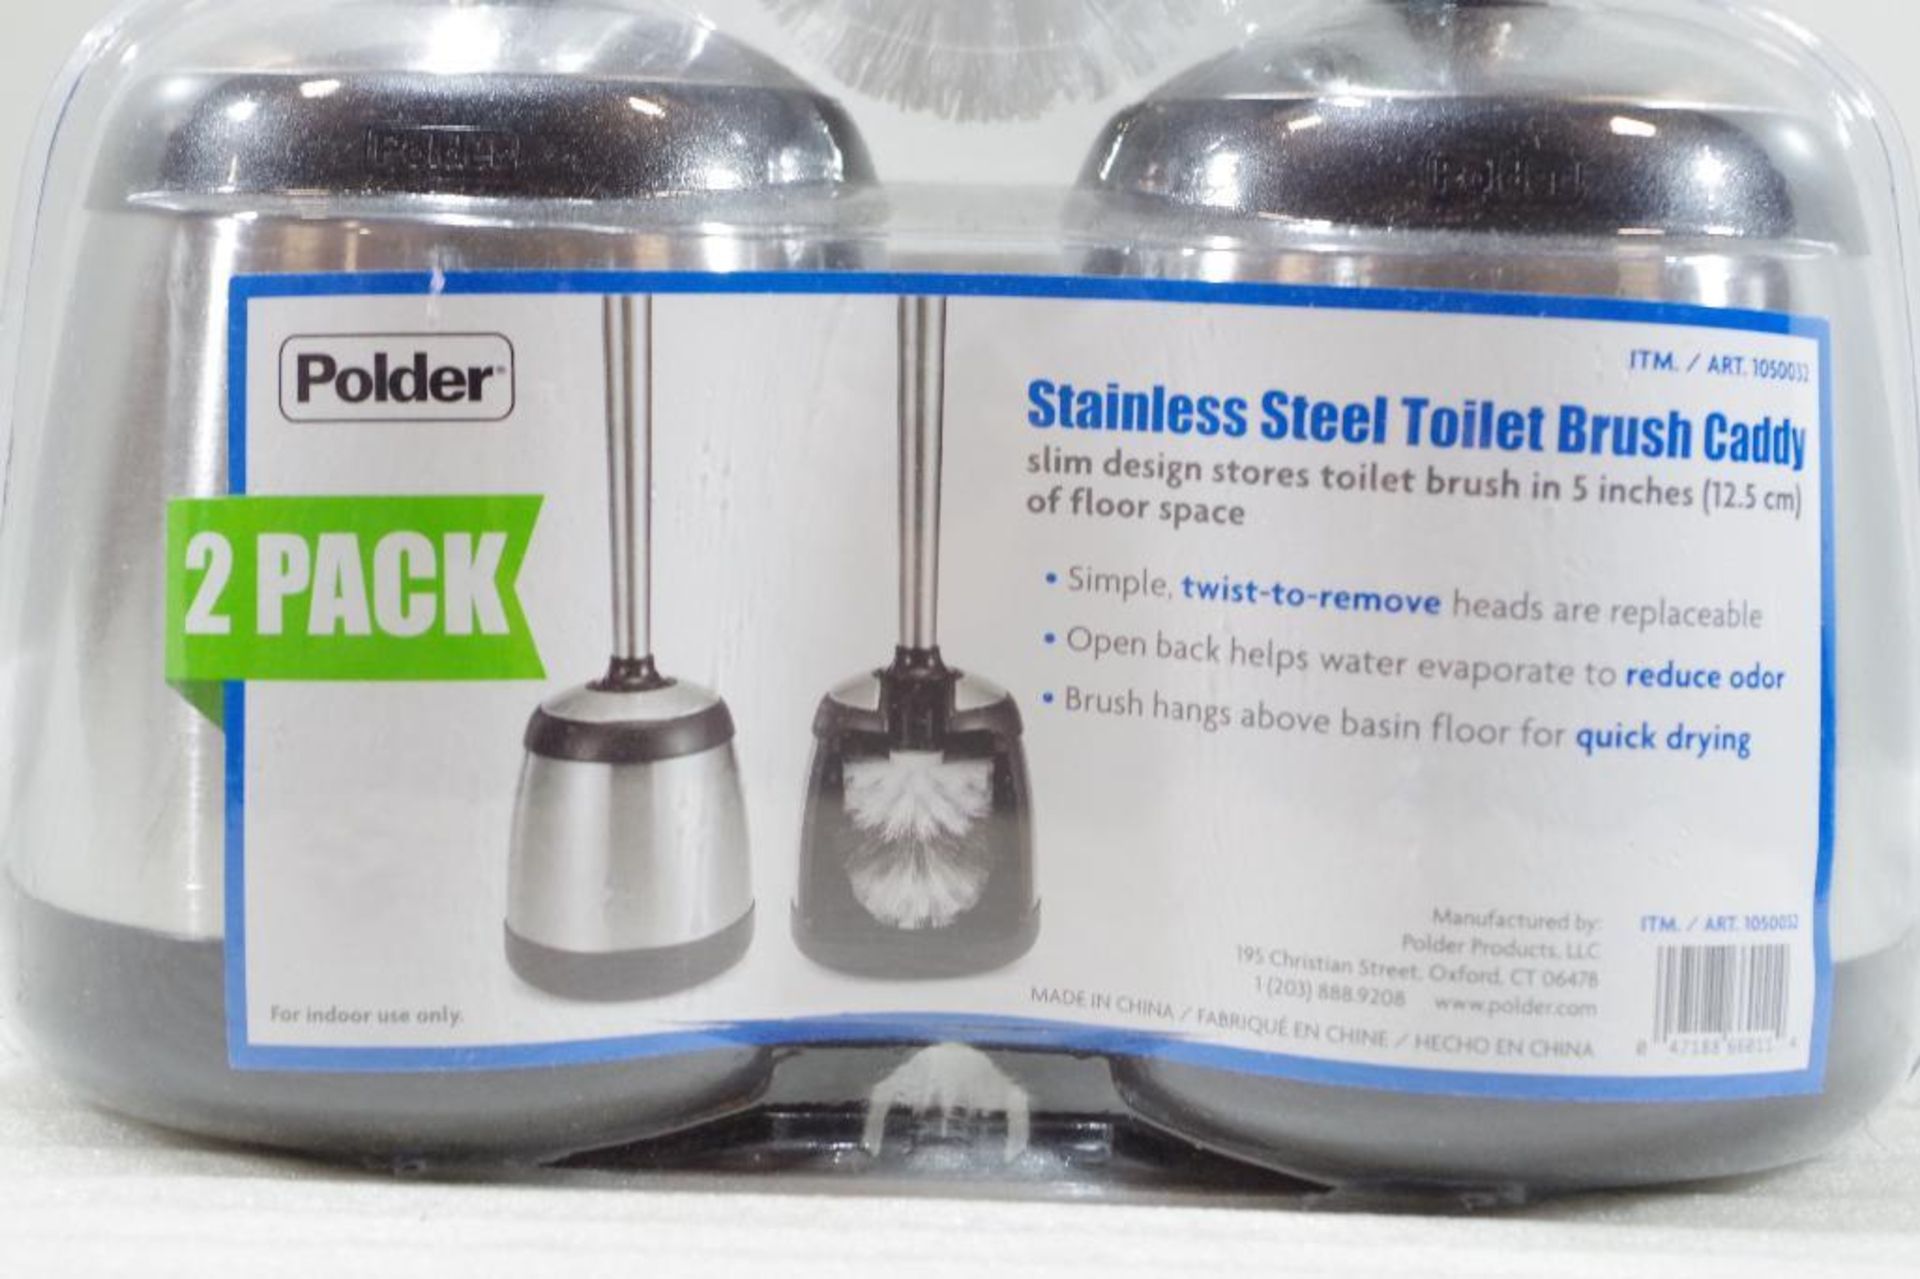 NEW 2-Pack POLDER Stainless Steel Toilet Brushes - Image 2 of 2